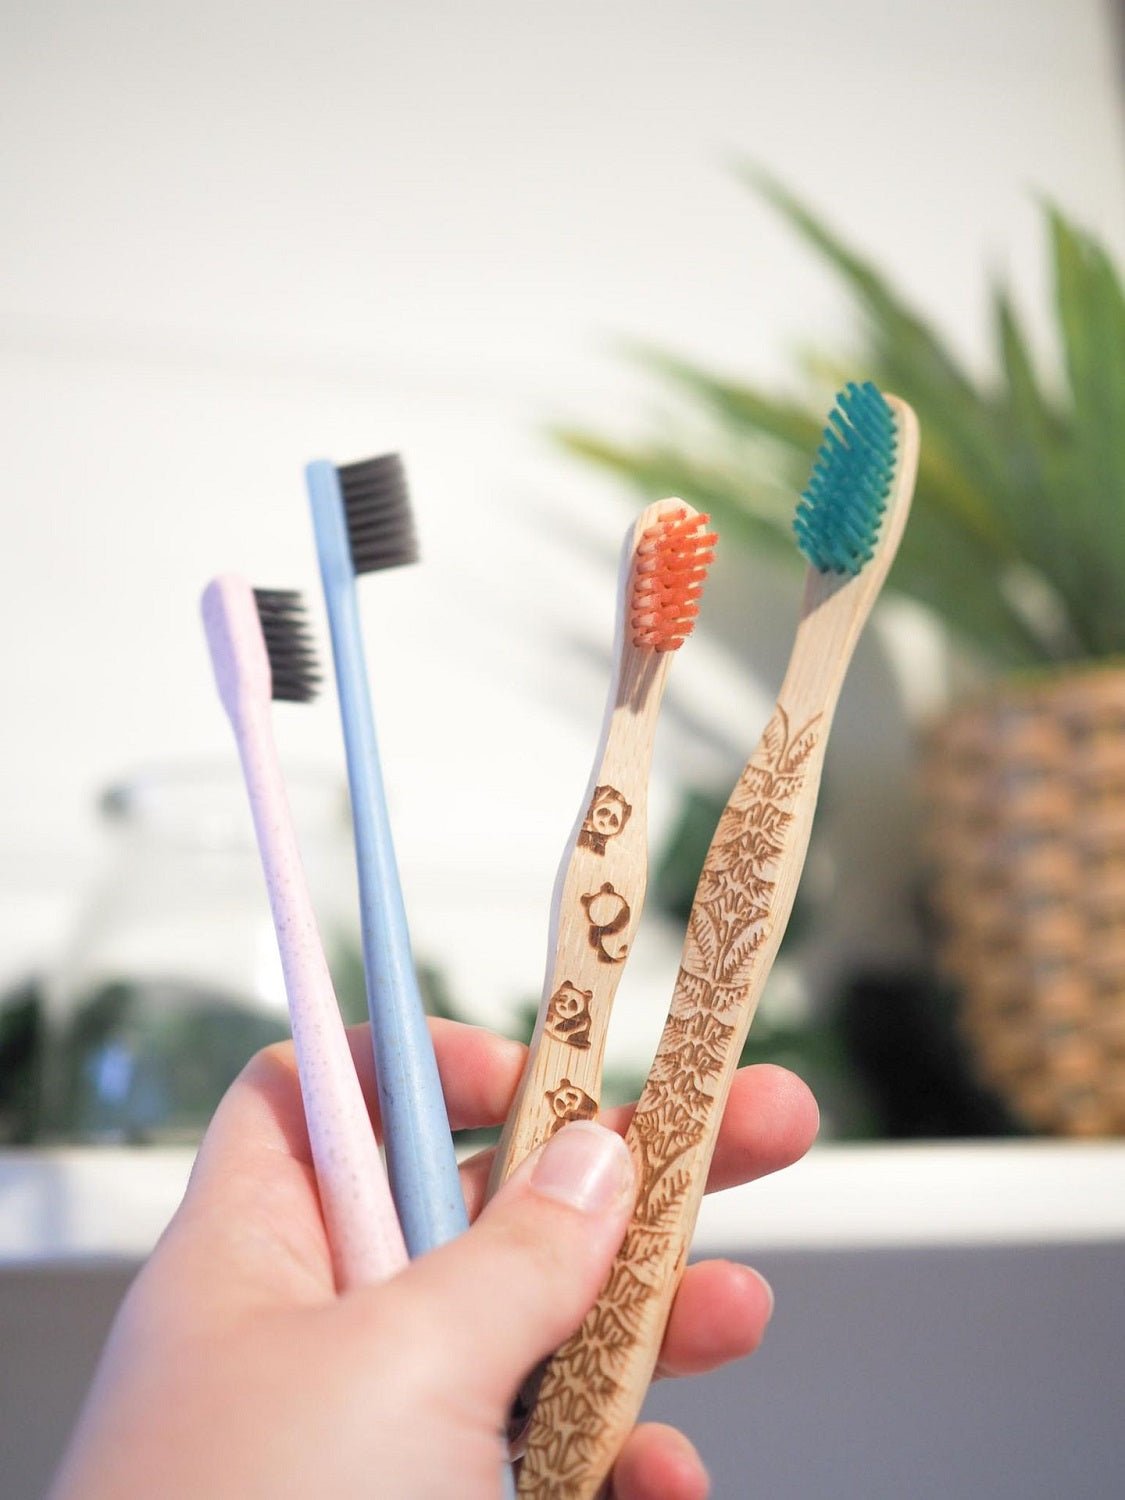 Brush It On - Plastic-Free Oral and Beauty Care Products - Pookipoiga